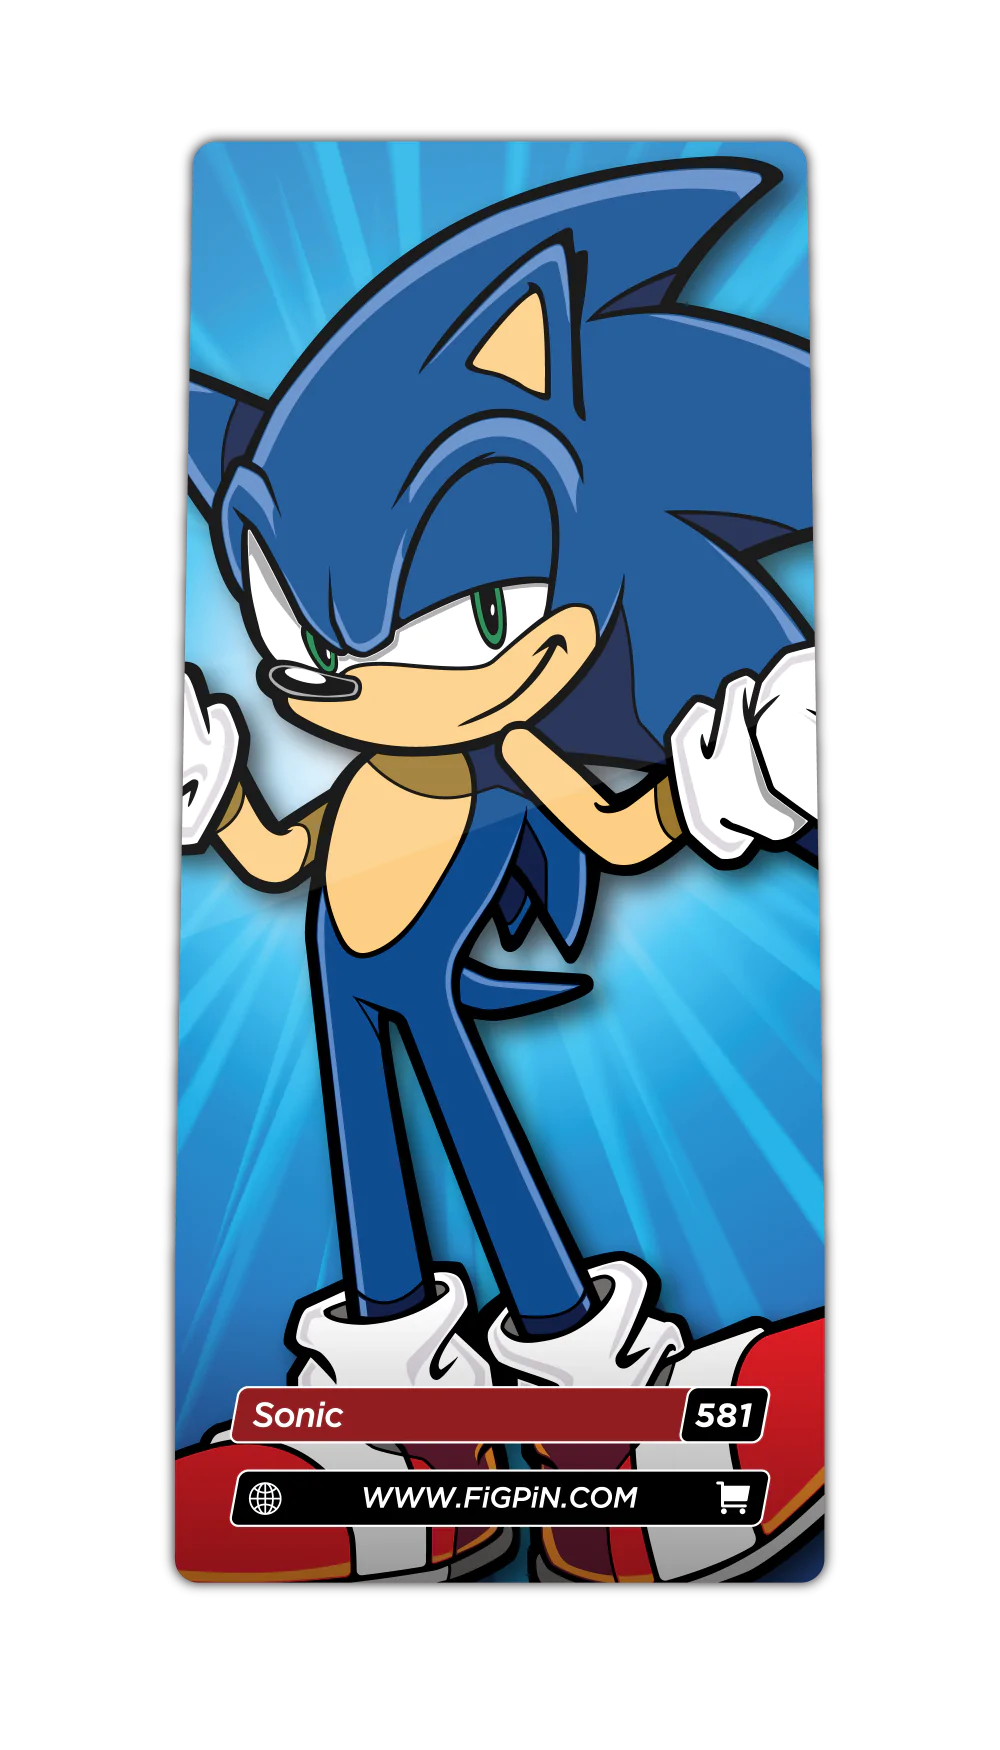 FiGPiN Sonic (581) Property: Sonic The Hedgehog